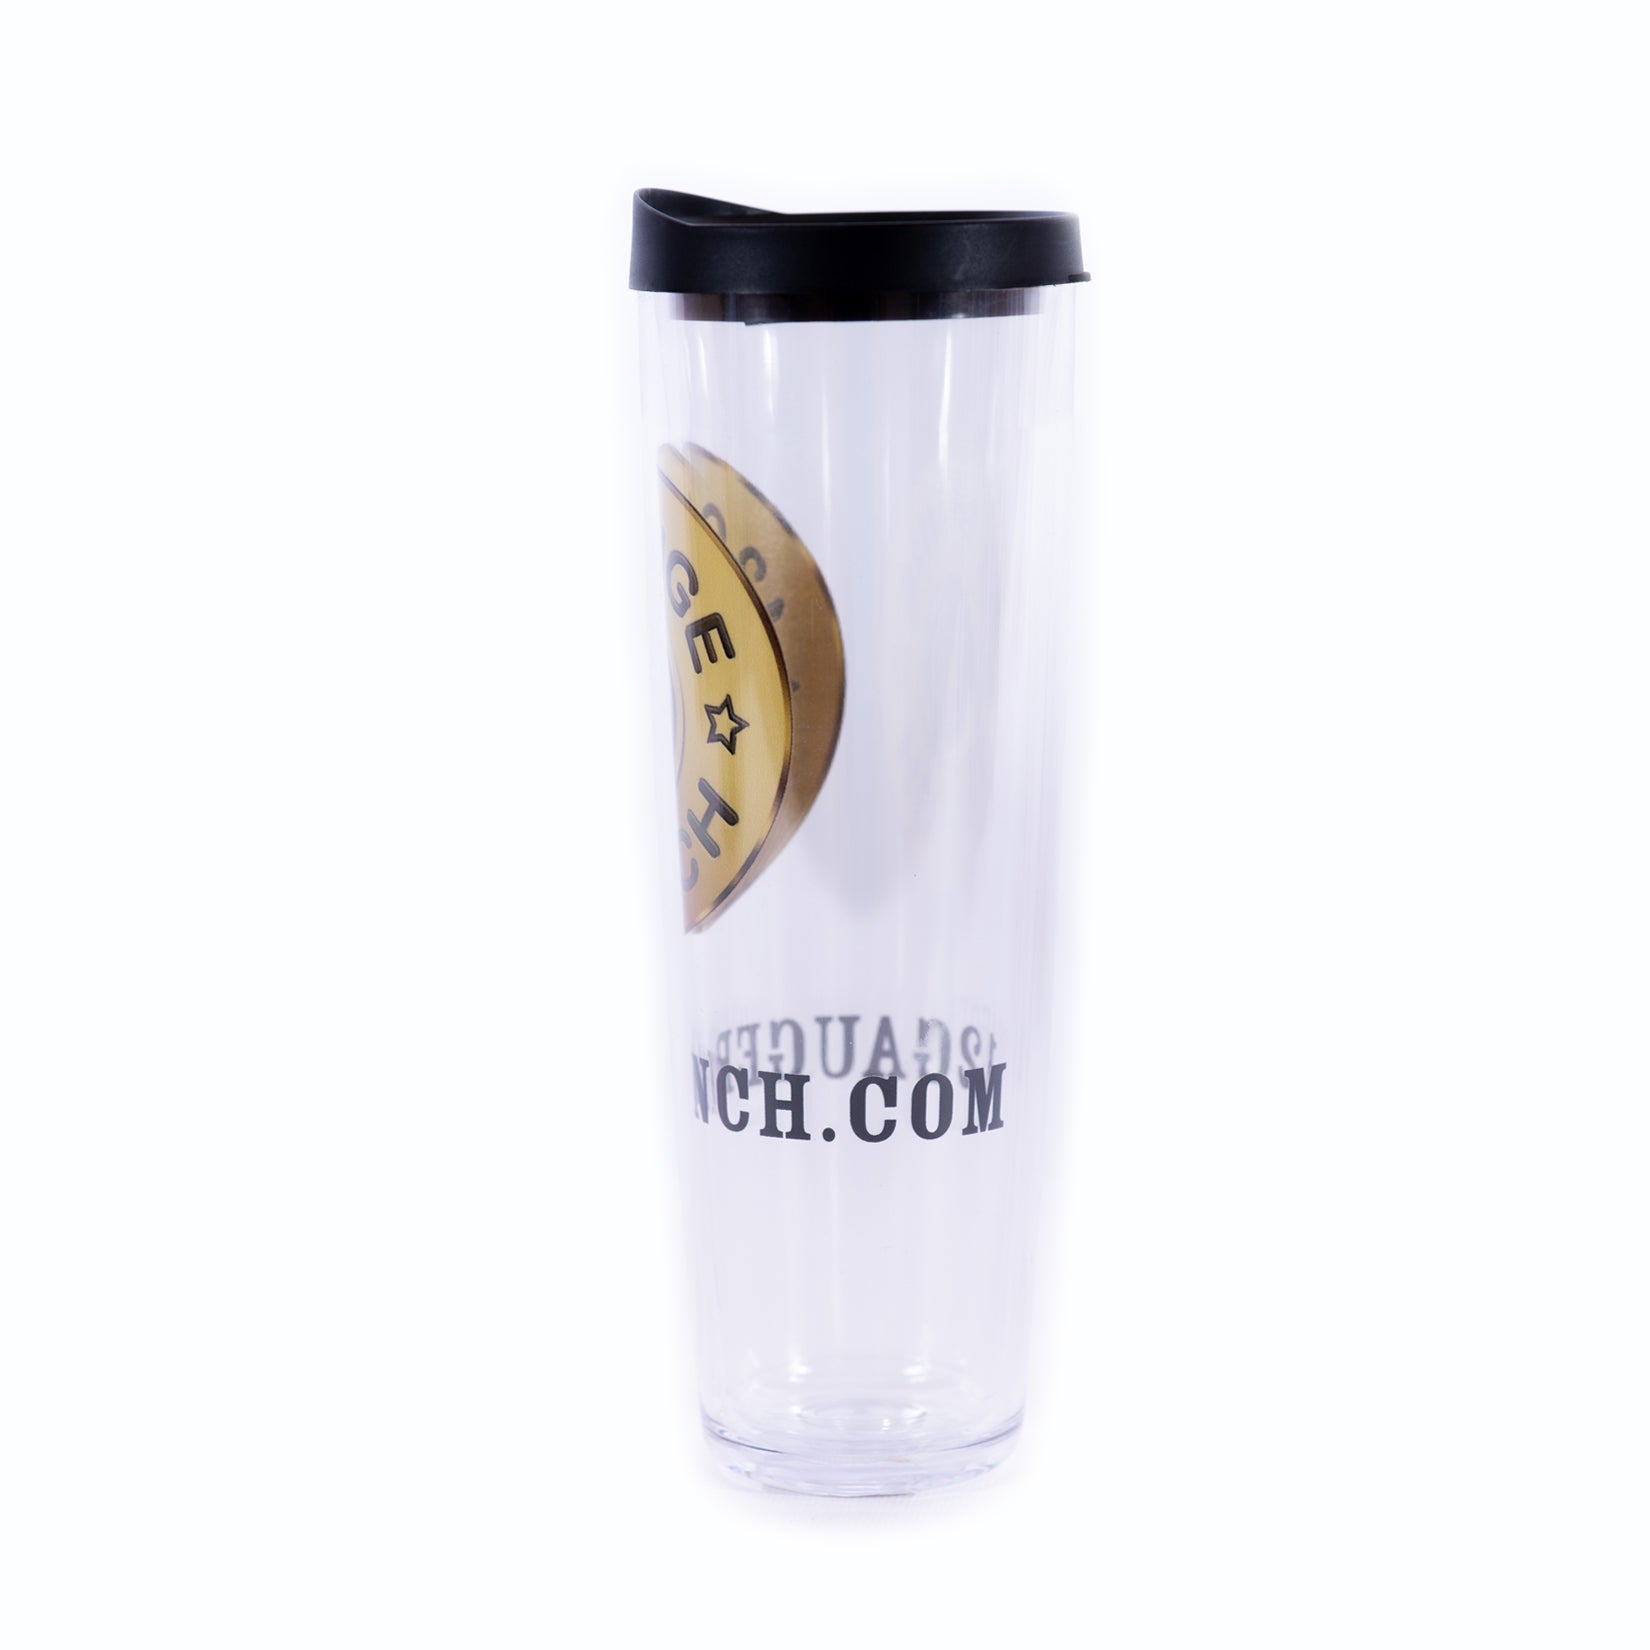 12 Gauge Bullet 24oz Insulated Covo Cup, Accessories, 12 Gauge Ranch, 12 Gauge Ranch Ranch  12 Gauge Ranch